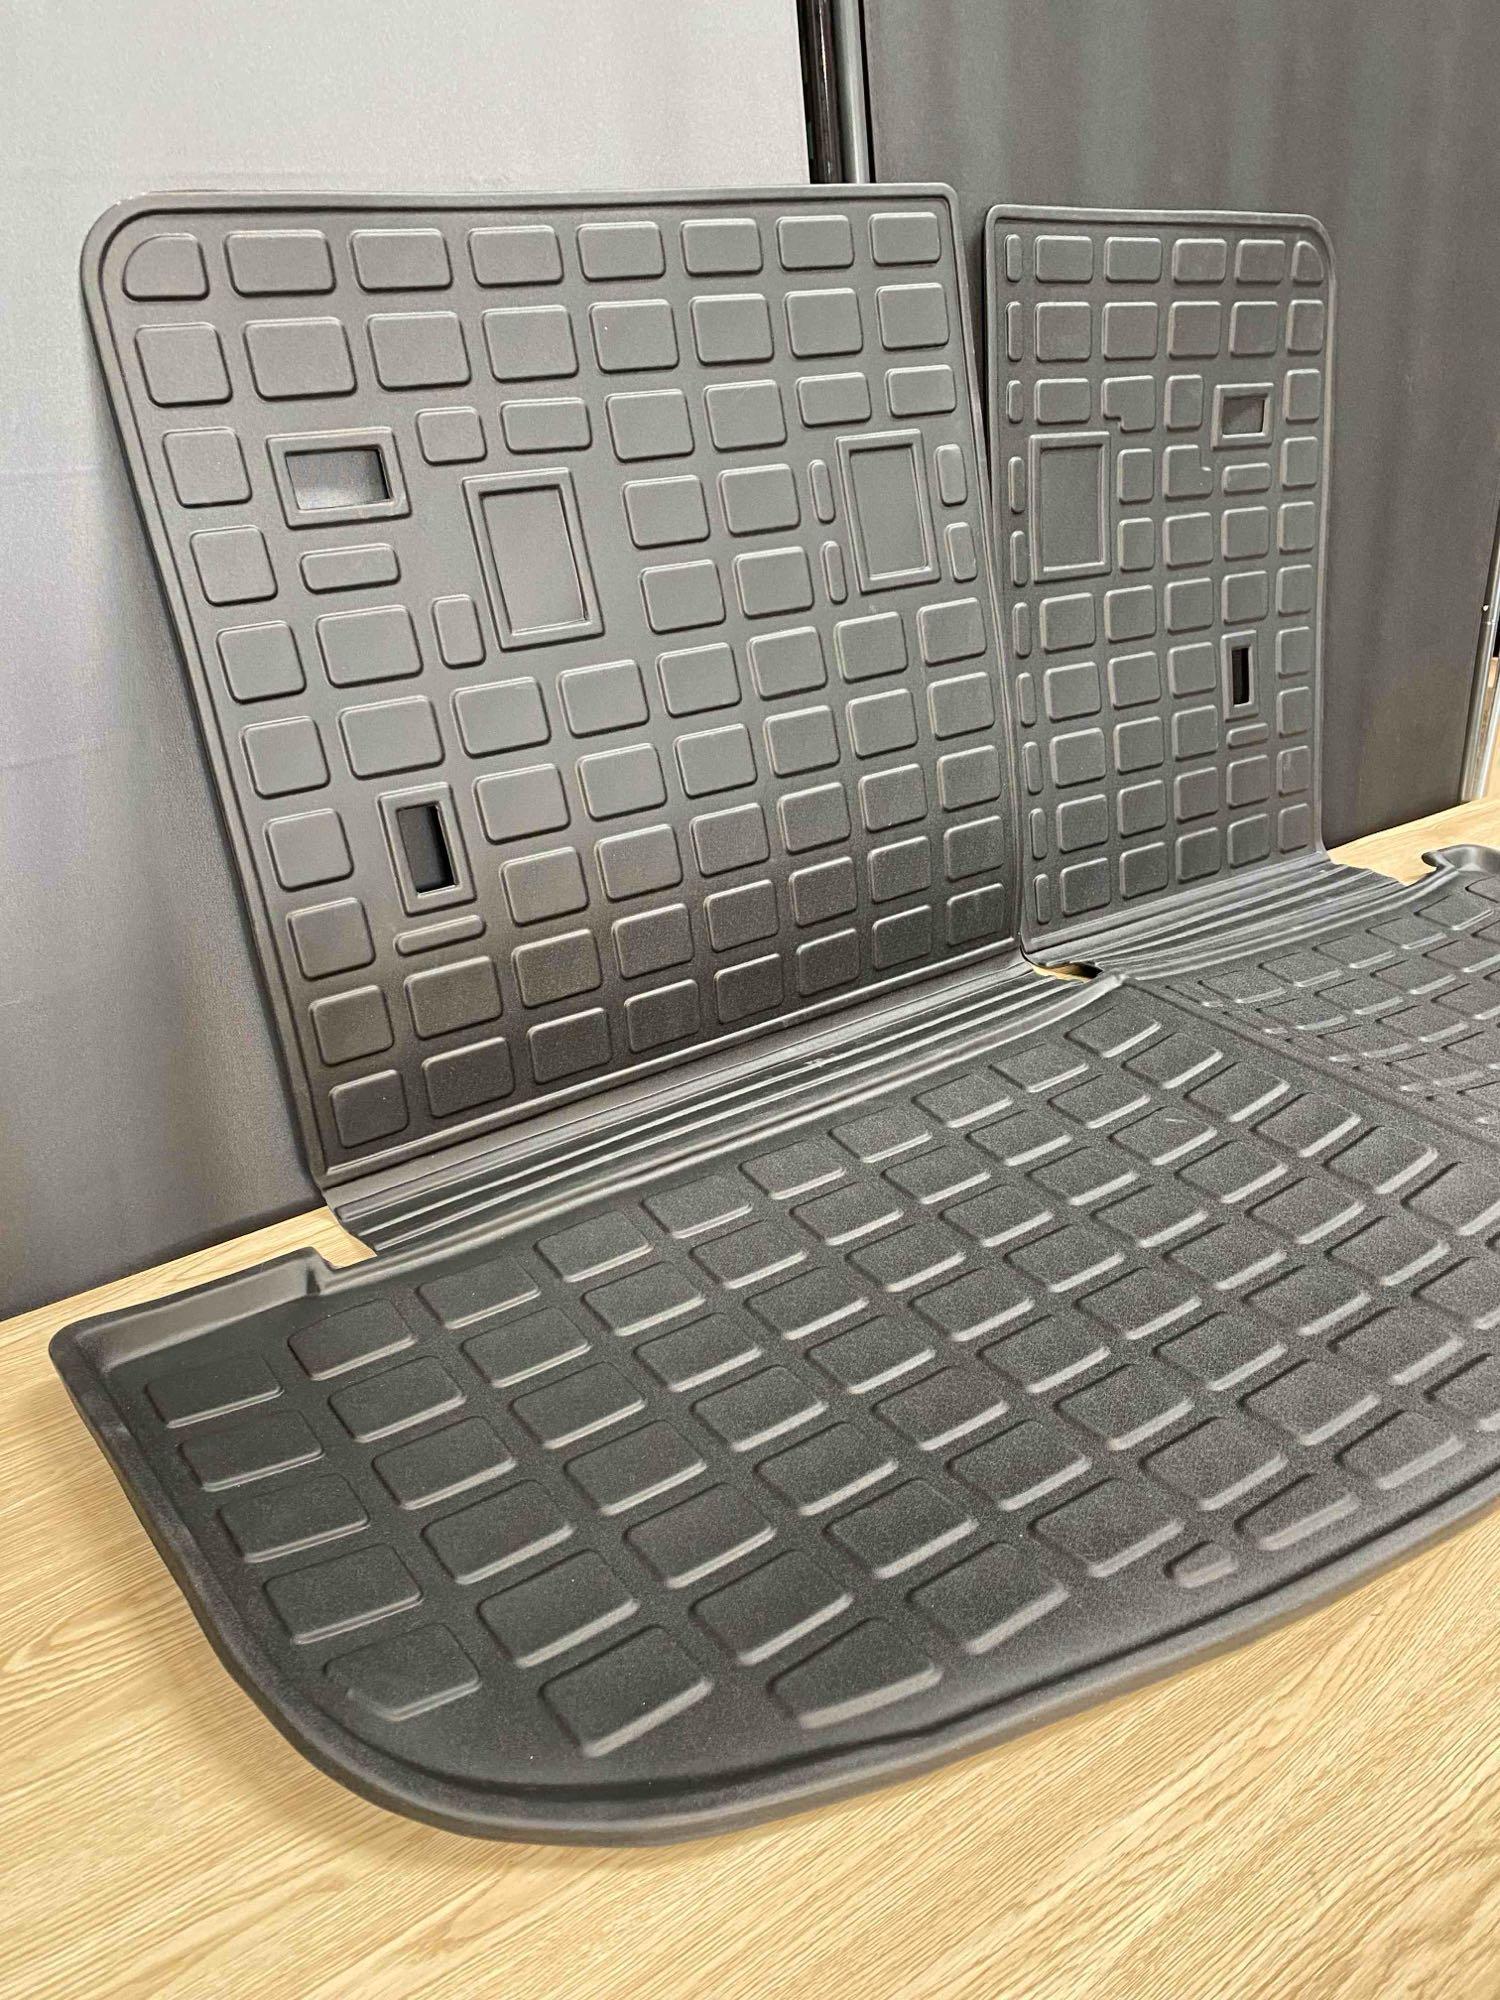 powoq Trunk Mat Compatible with 2020-2024 Kia Telluride Cargo Liner